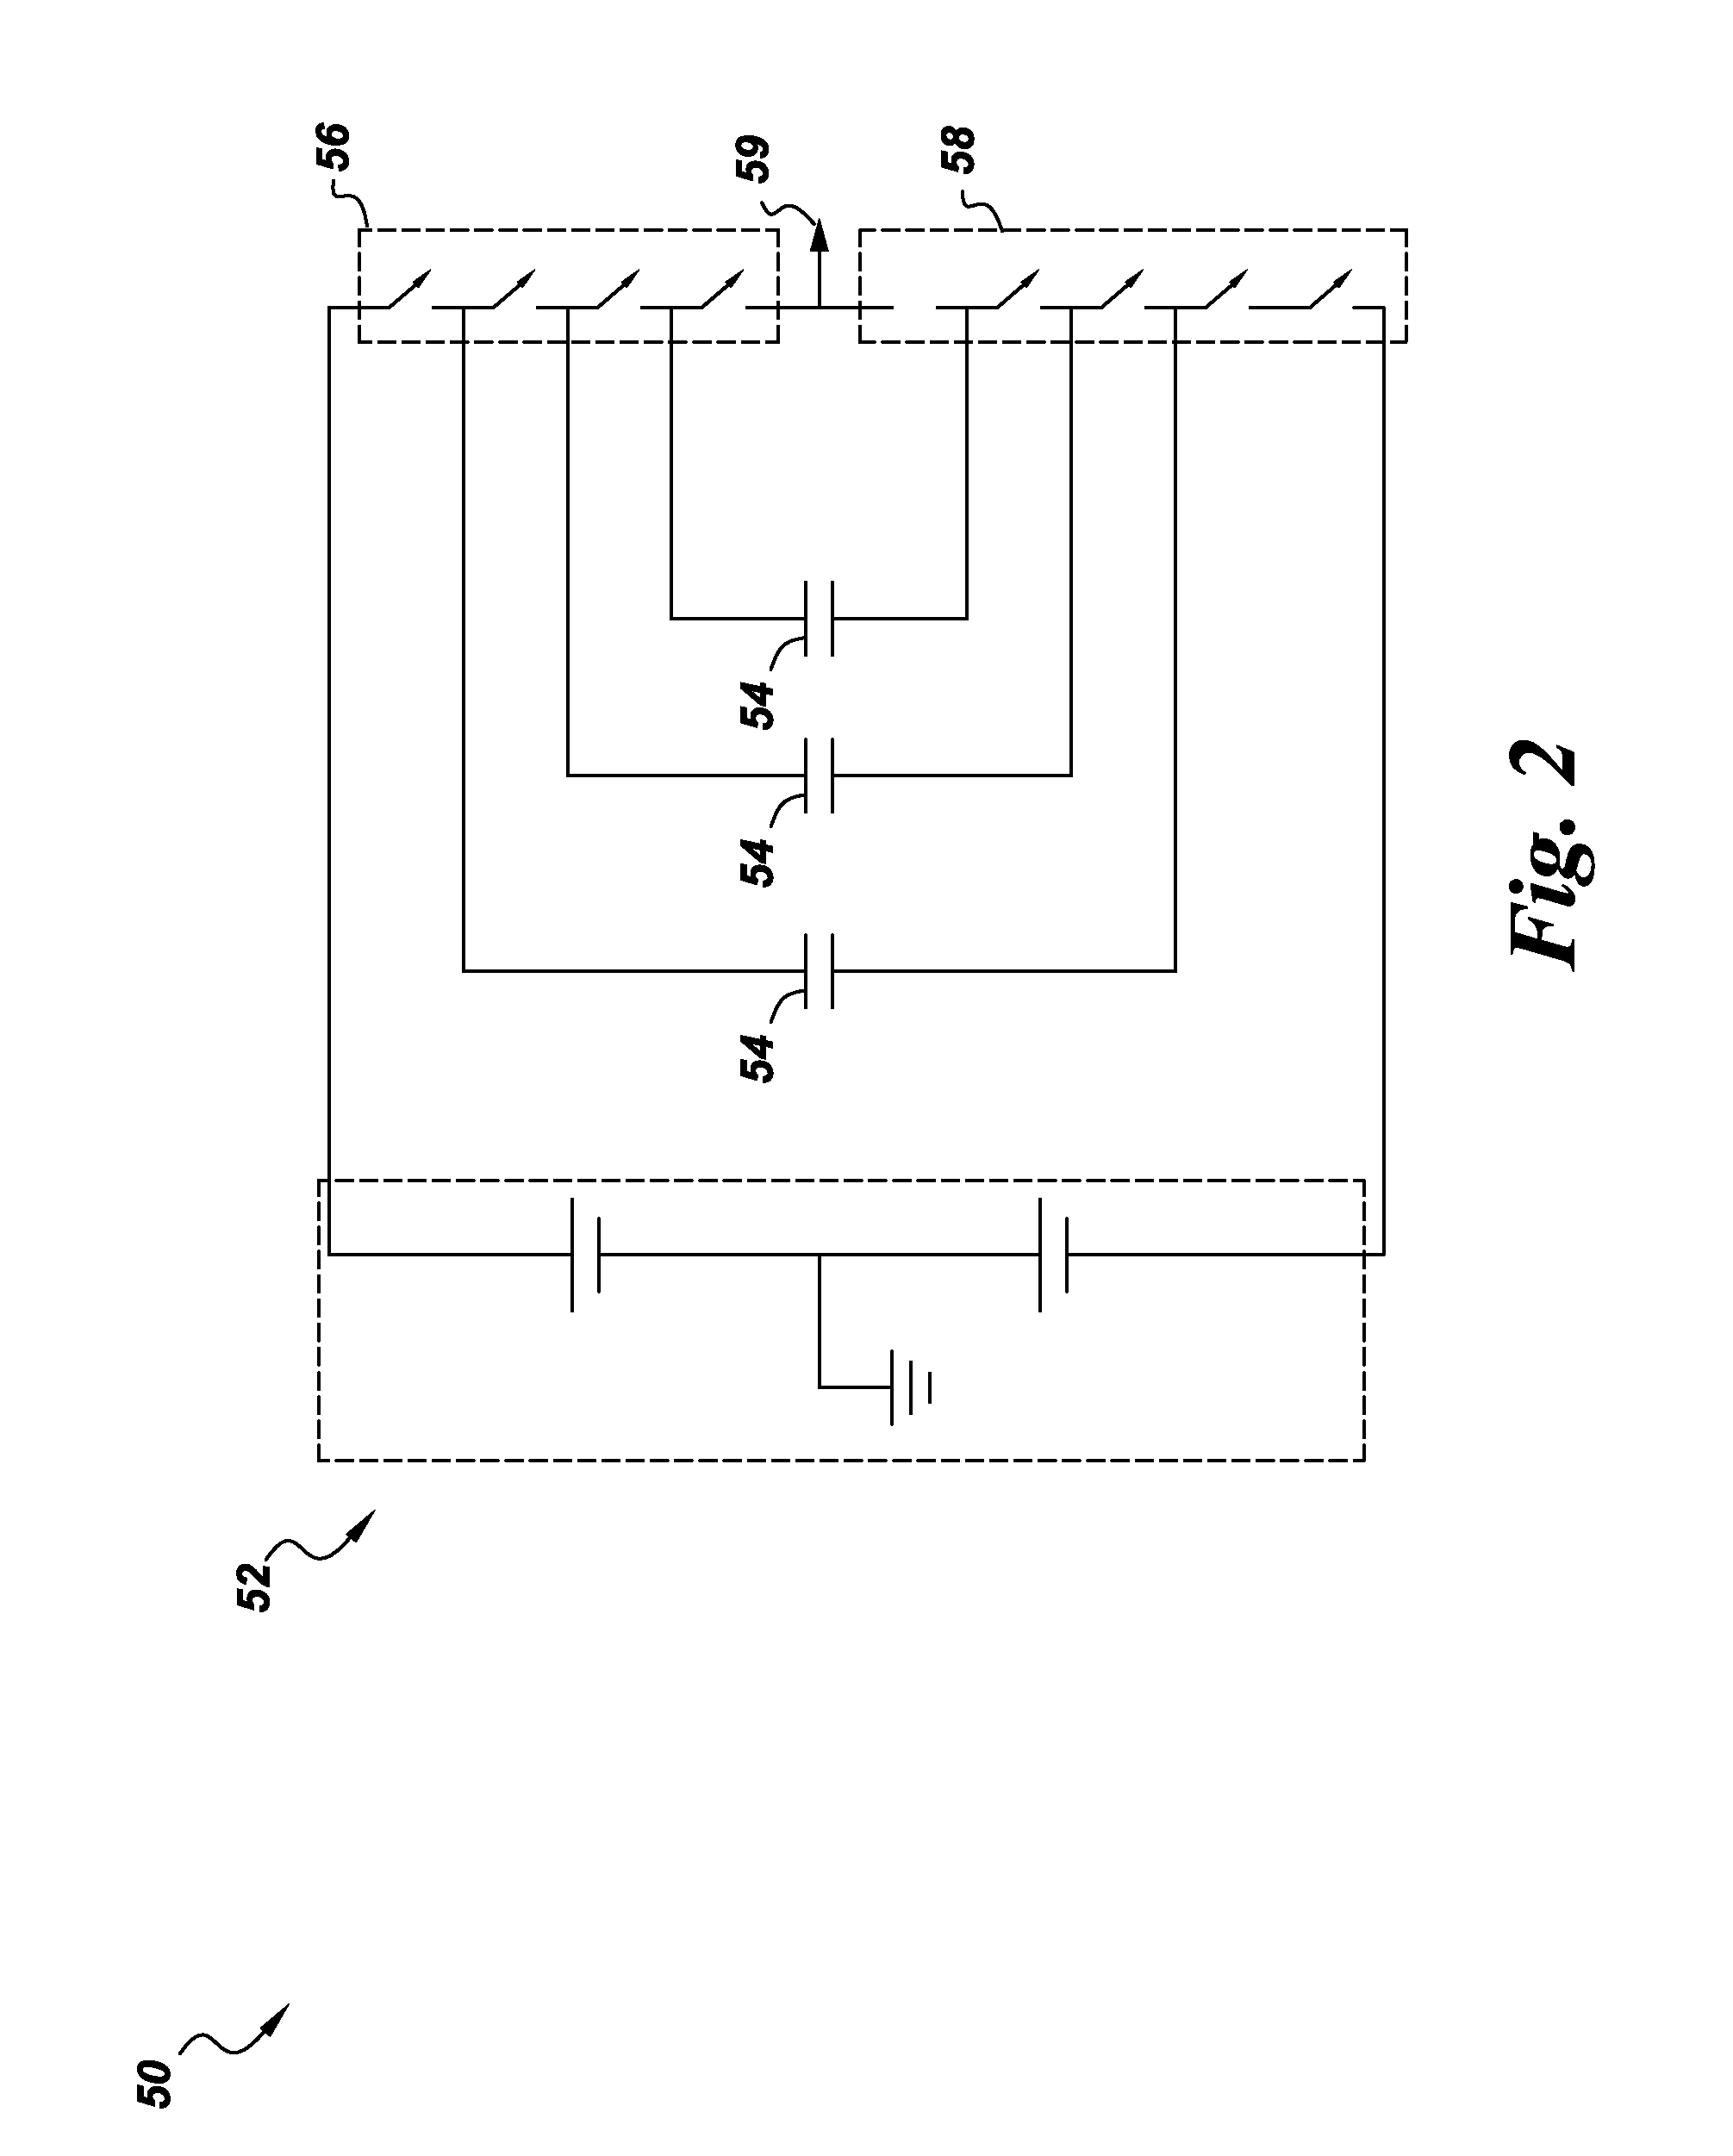 Voltage balancing system and method for multilevel converters